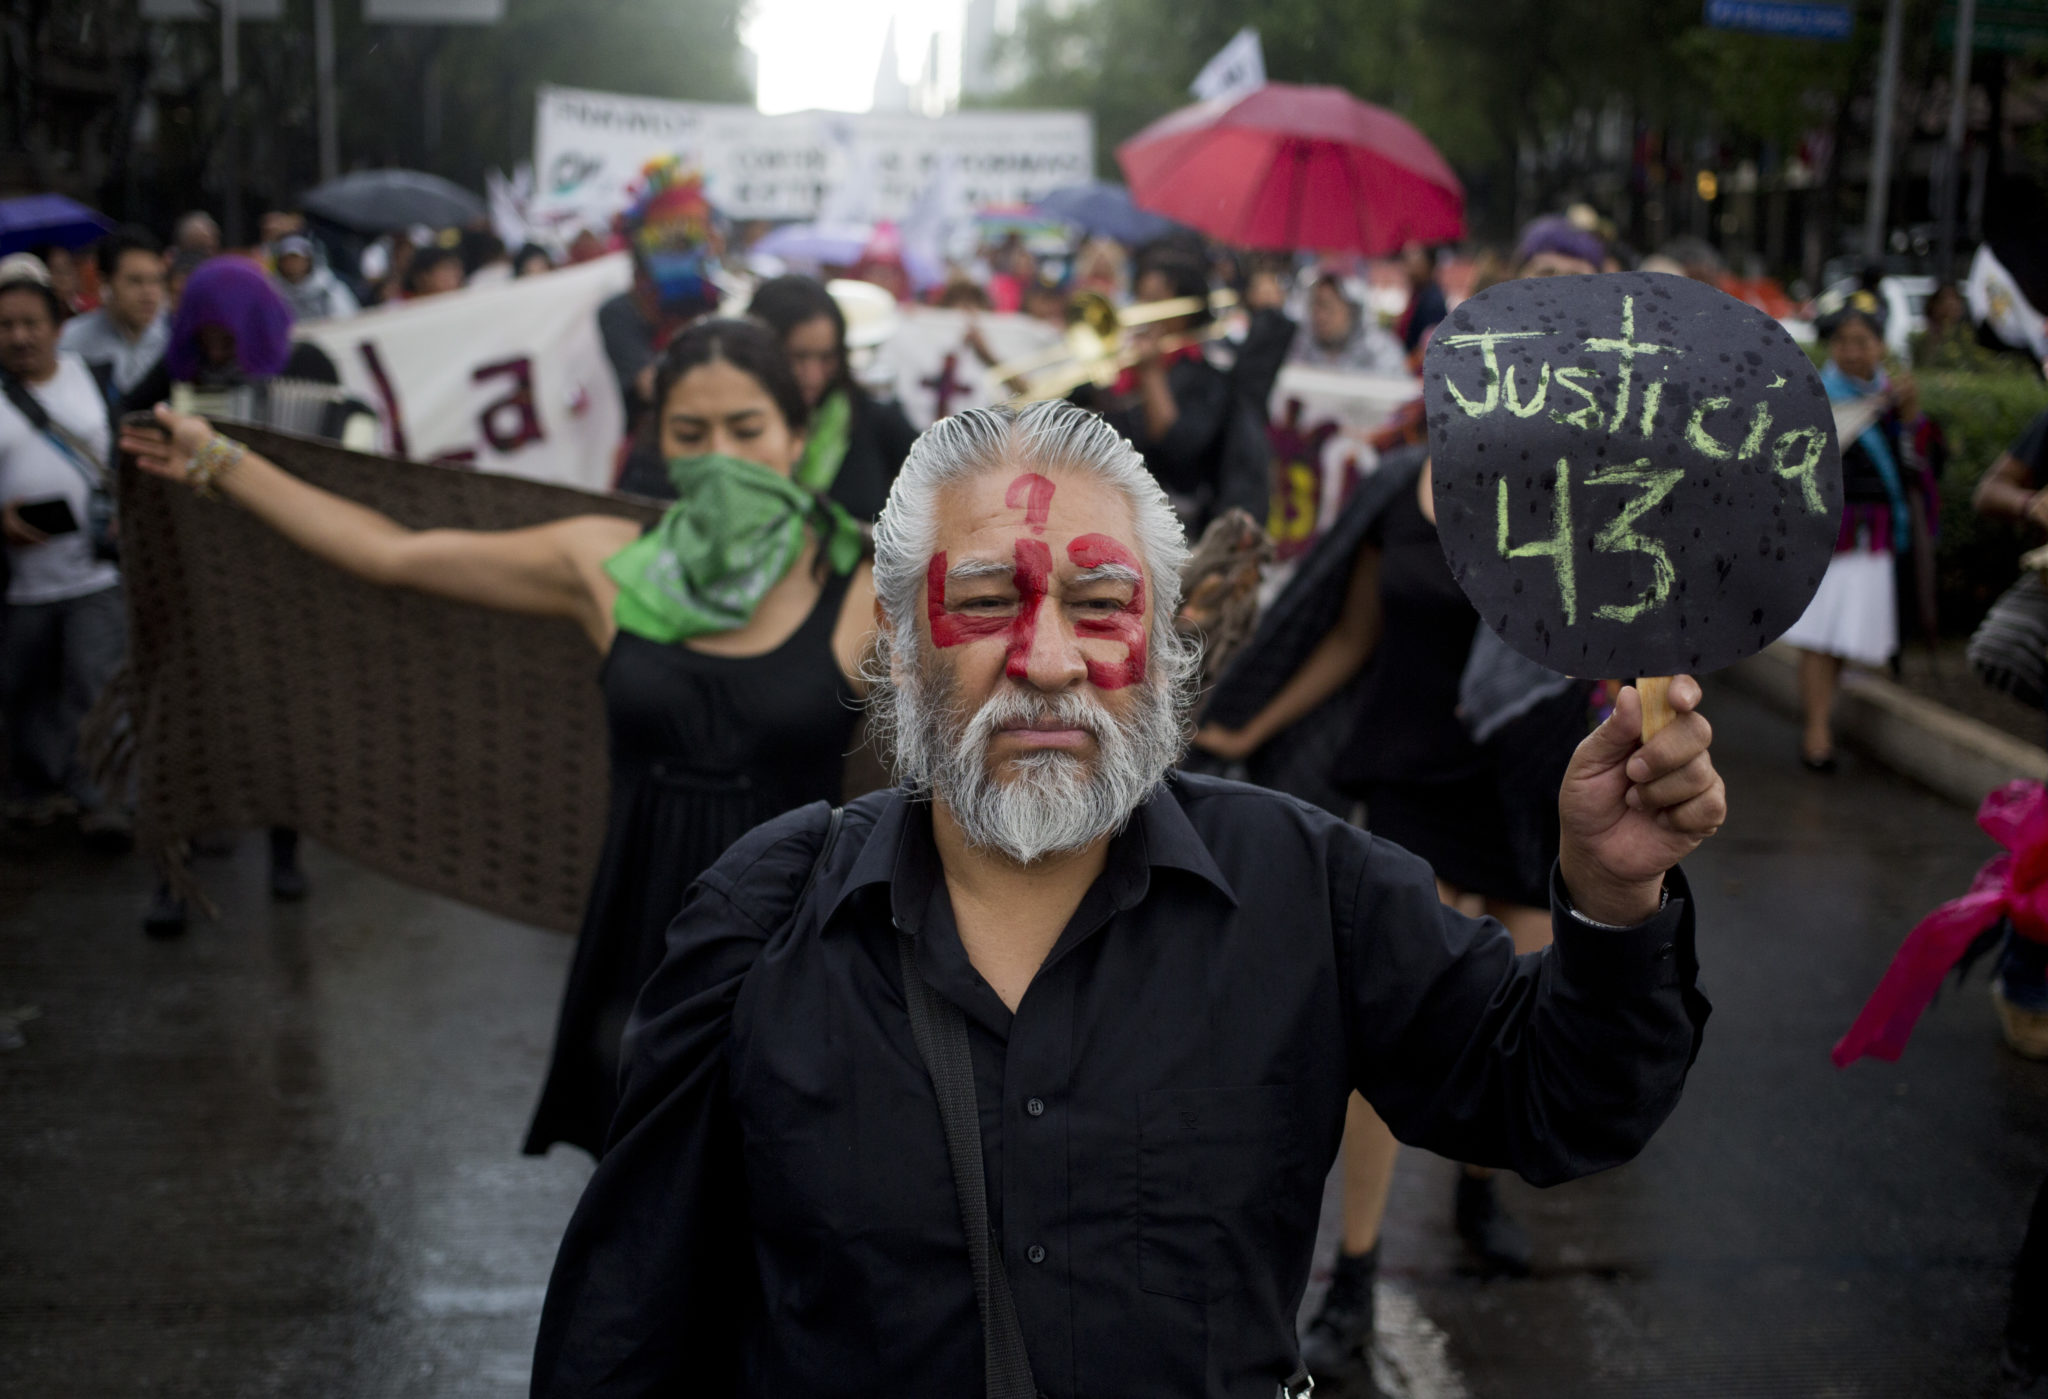 A demonstrator with the number 43 painted on his face and a sign with the word "Justice" written in Spanish in reference to the 43 missing students from a rural teachers college, marches in protest, marking 30 months since their disappearance, in Mexico City, Sunday, March 26, 2017. The federal prosecutor claimed that the students were detained by local police and handed over to a drug gang, who killed them and burned their bodies, but a group of experts from the Inter-American Commission on Human Rights does not agree with that hypothesis. (AP Photo/Eduardo Verdugo)